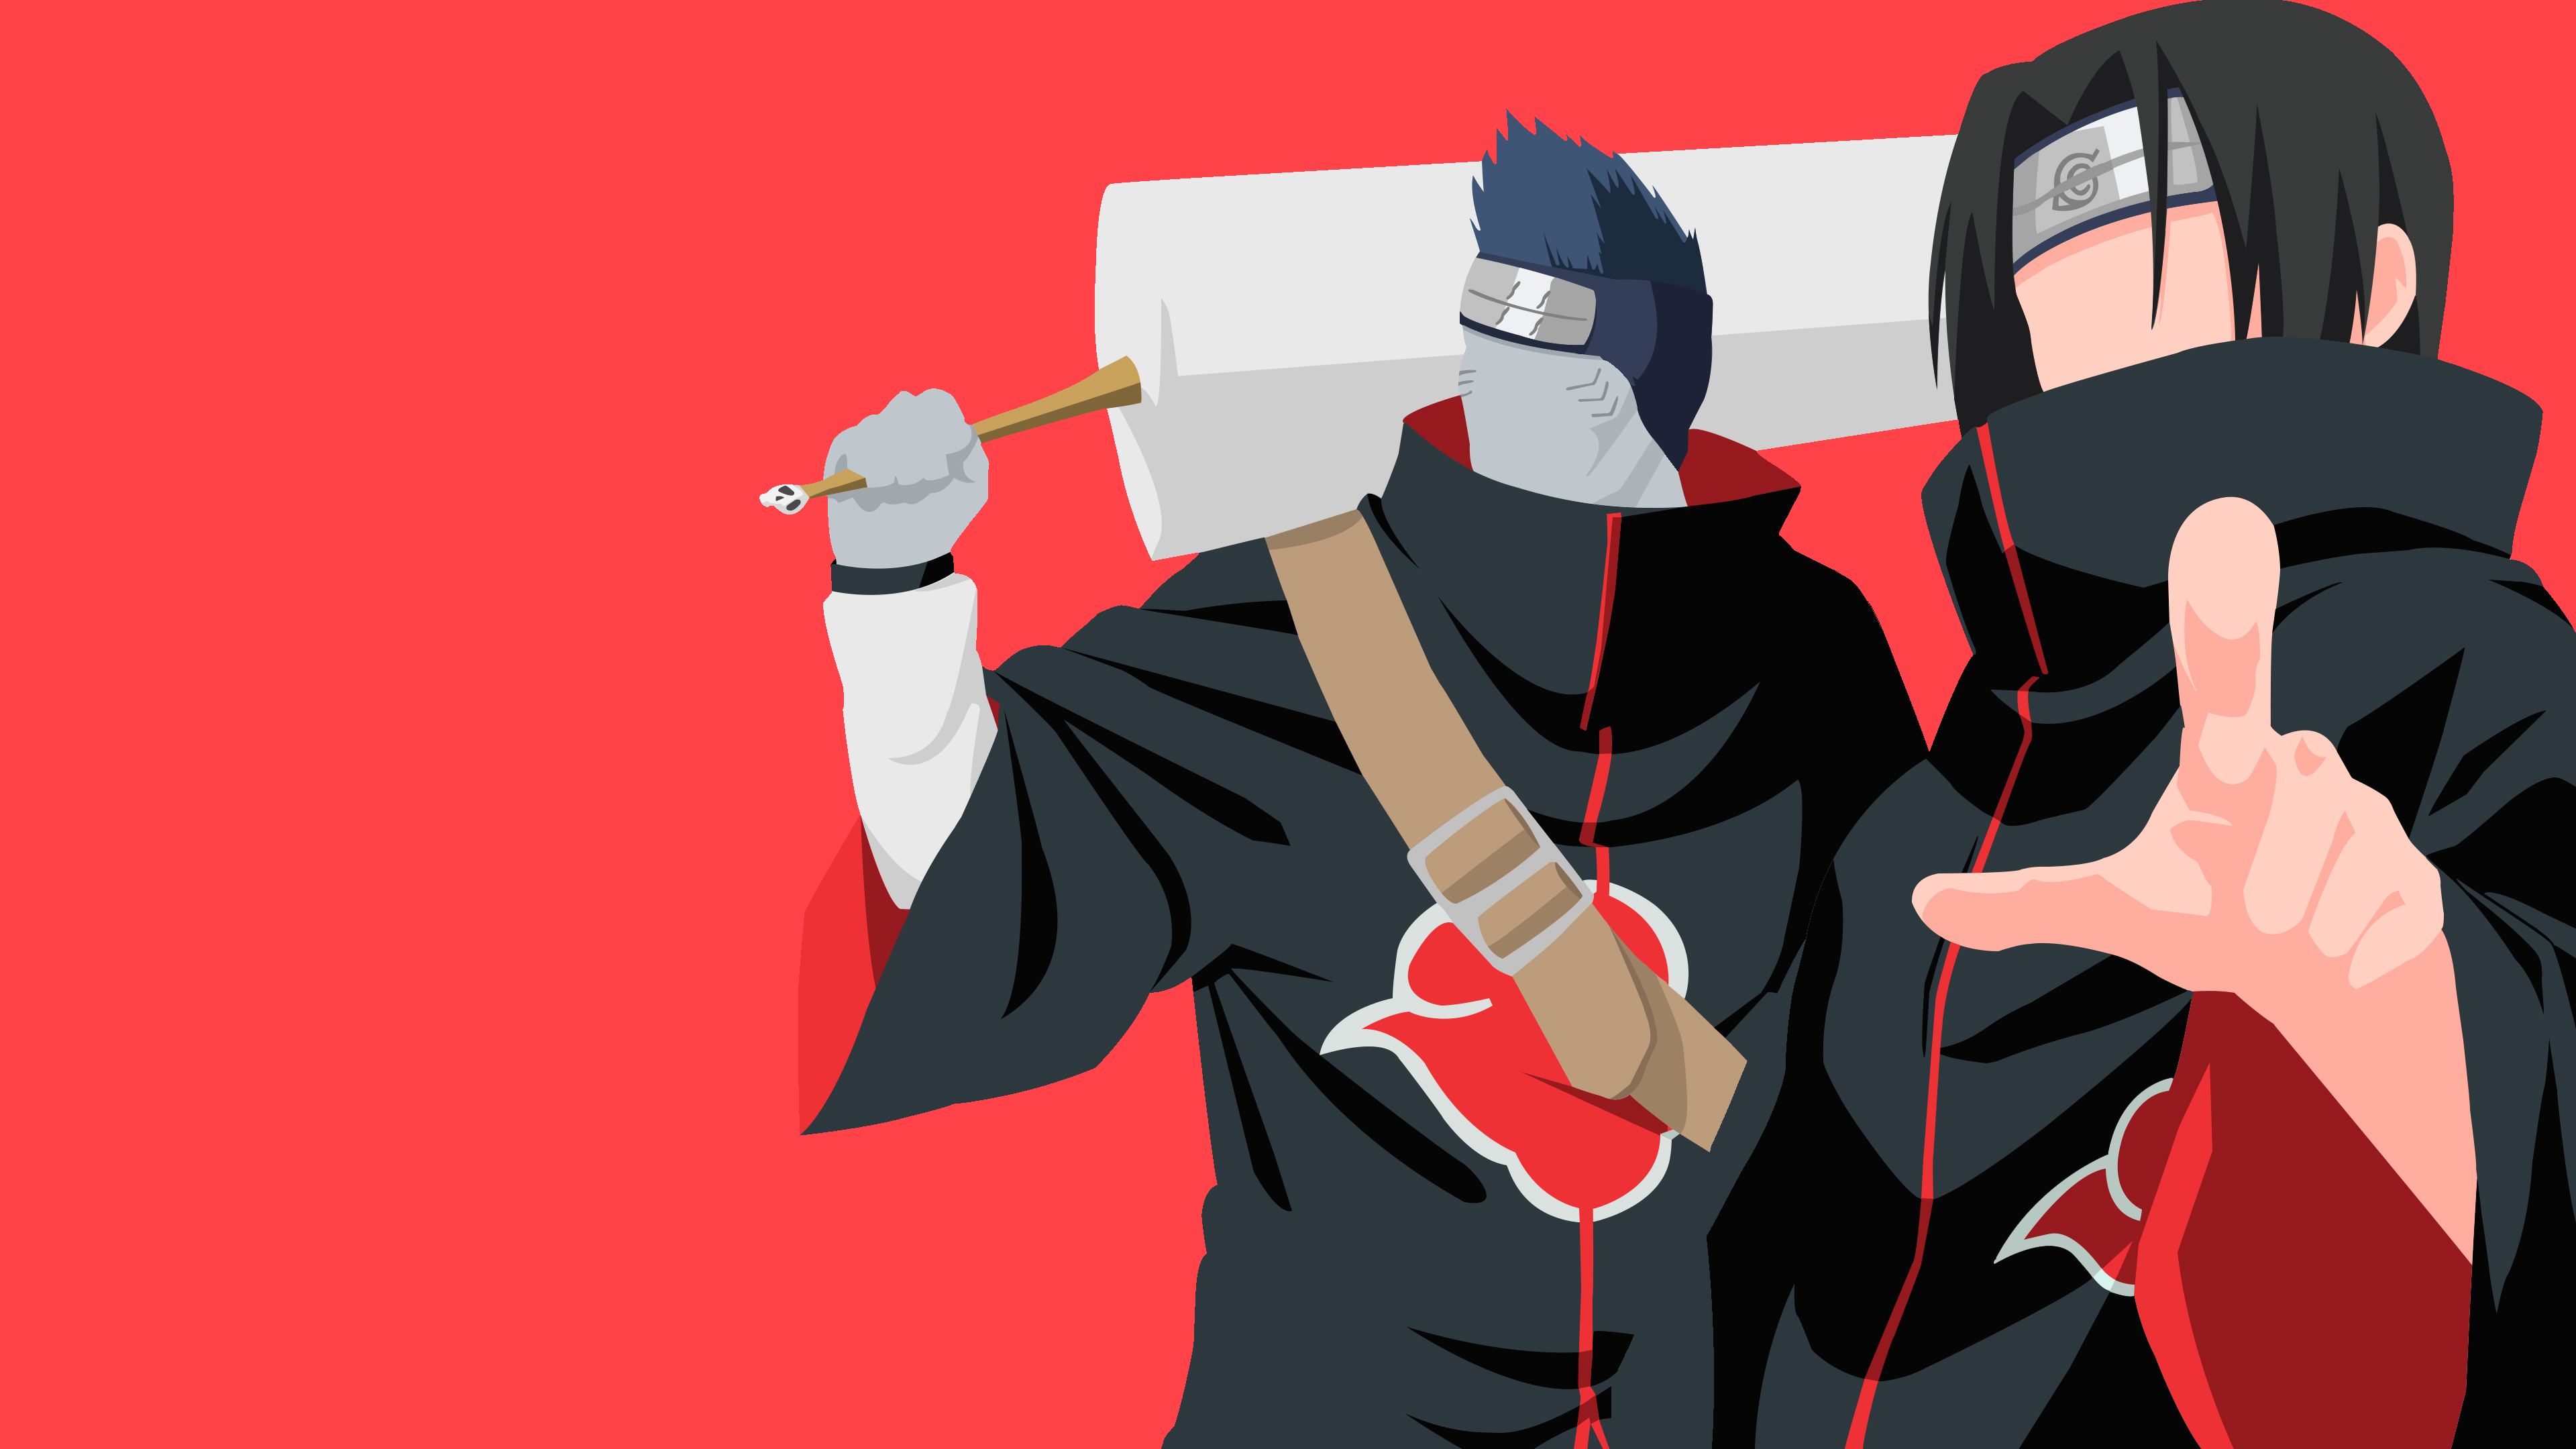 Itachi And Kisame Wallpapers